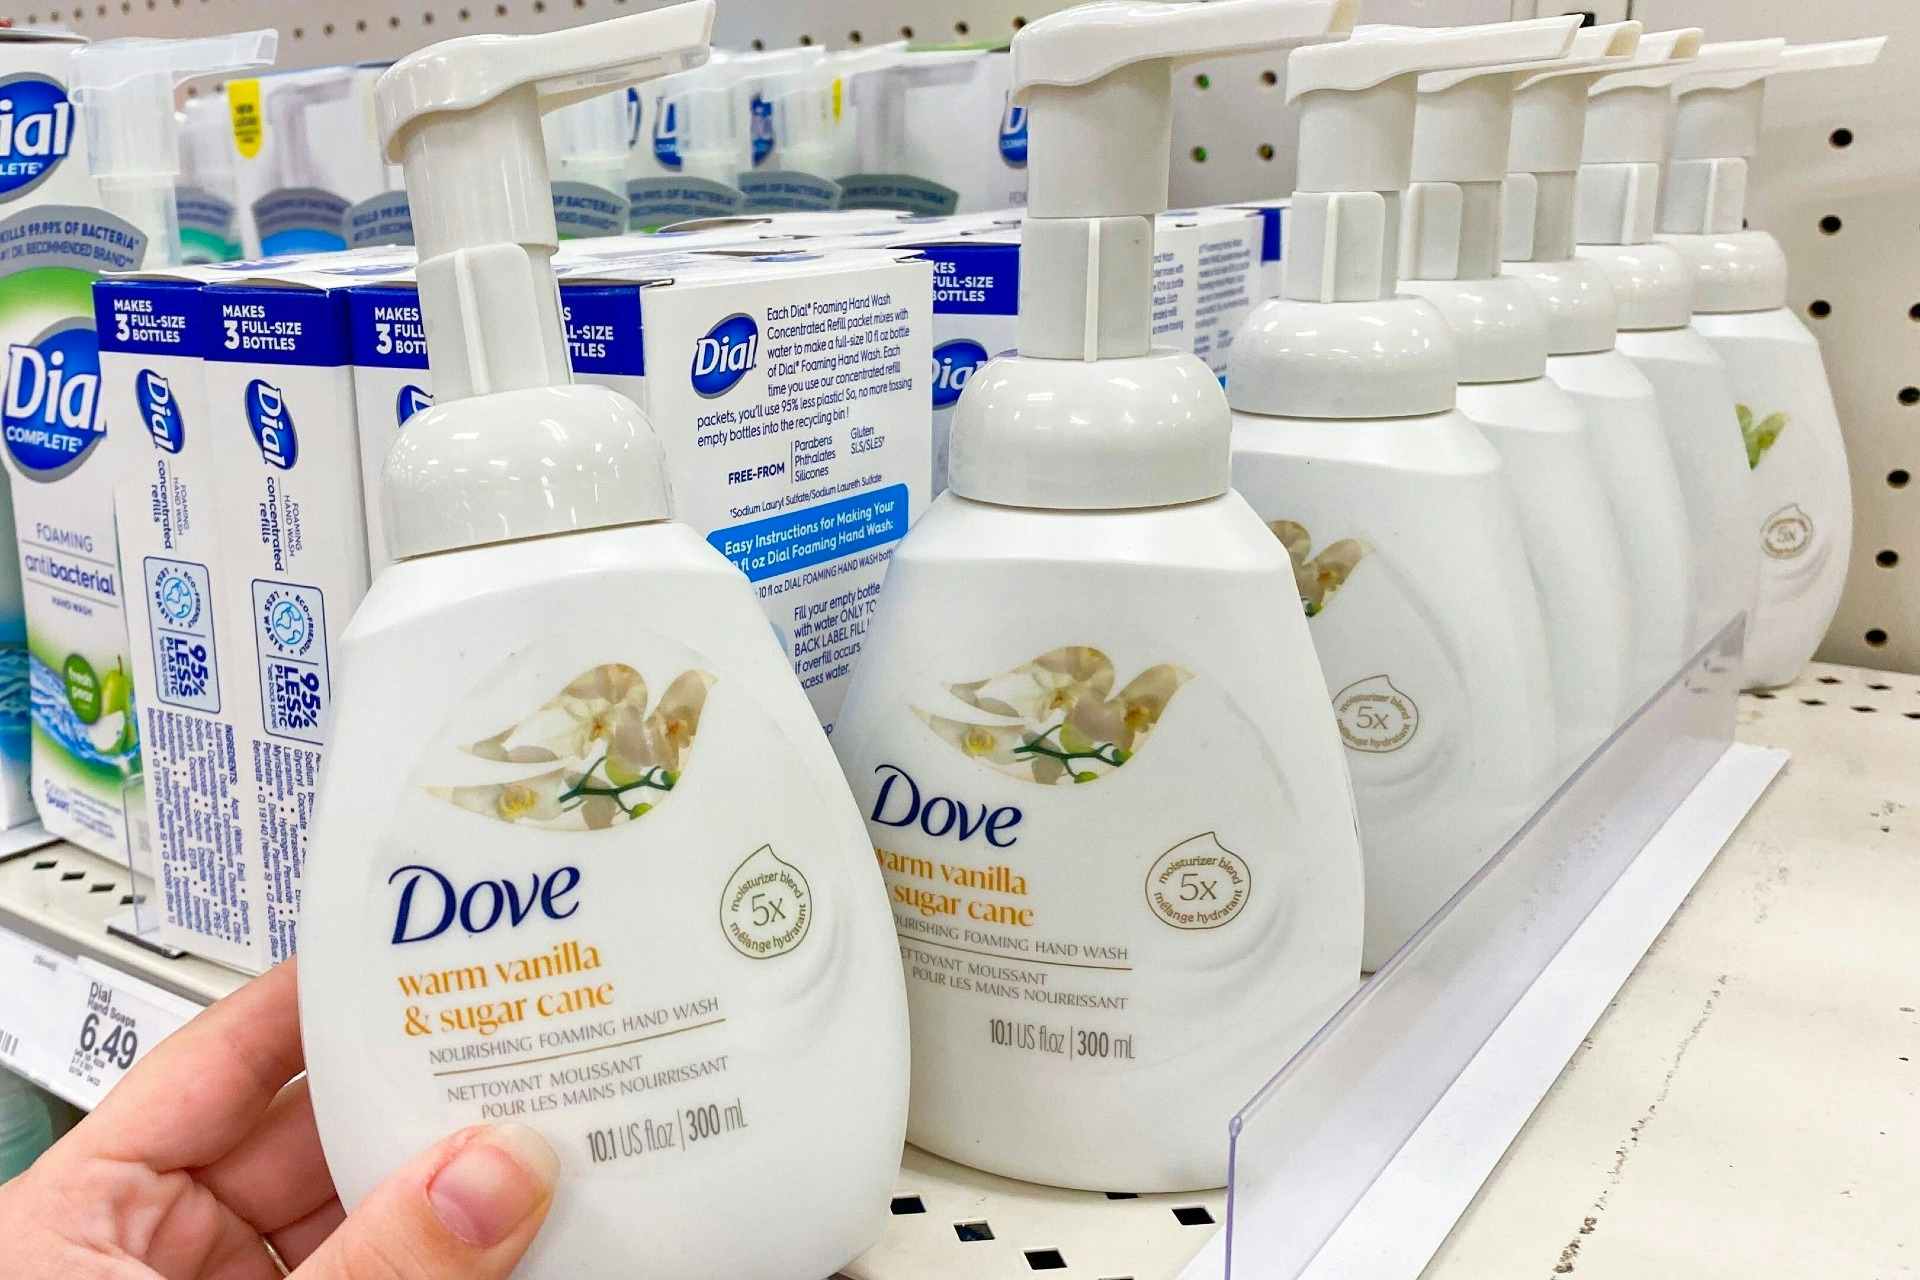 Dove Hand Soap: Get 4 Bottles for as Low as $11.12 on Amazon